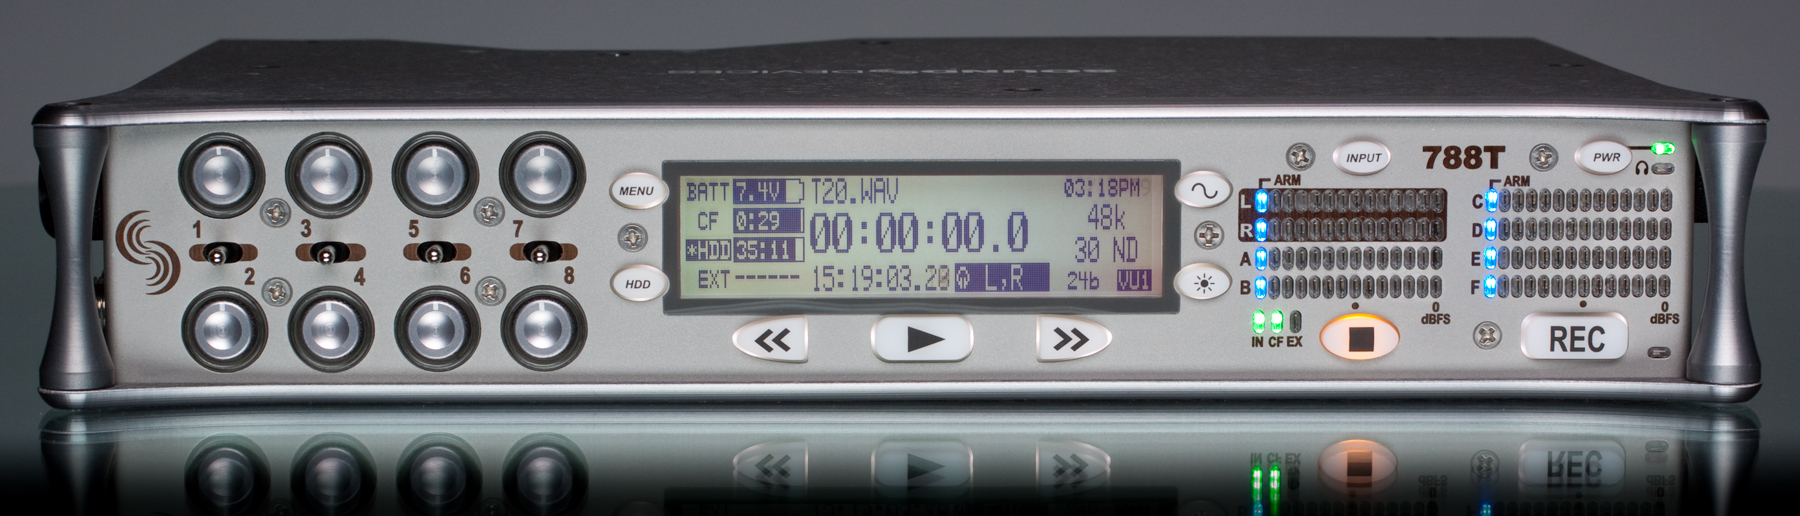 sound-devices-788t-ssd